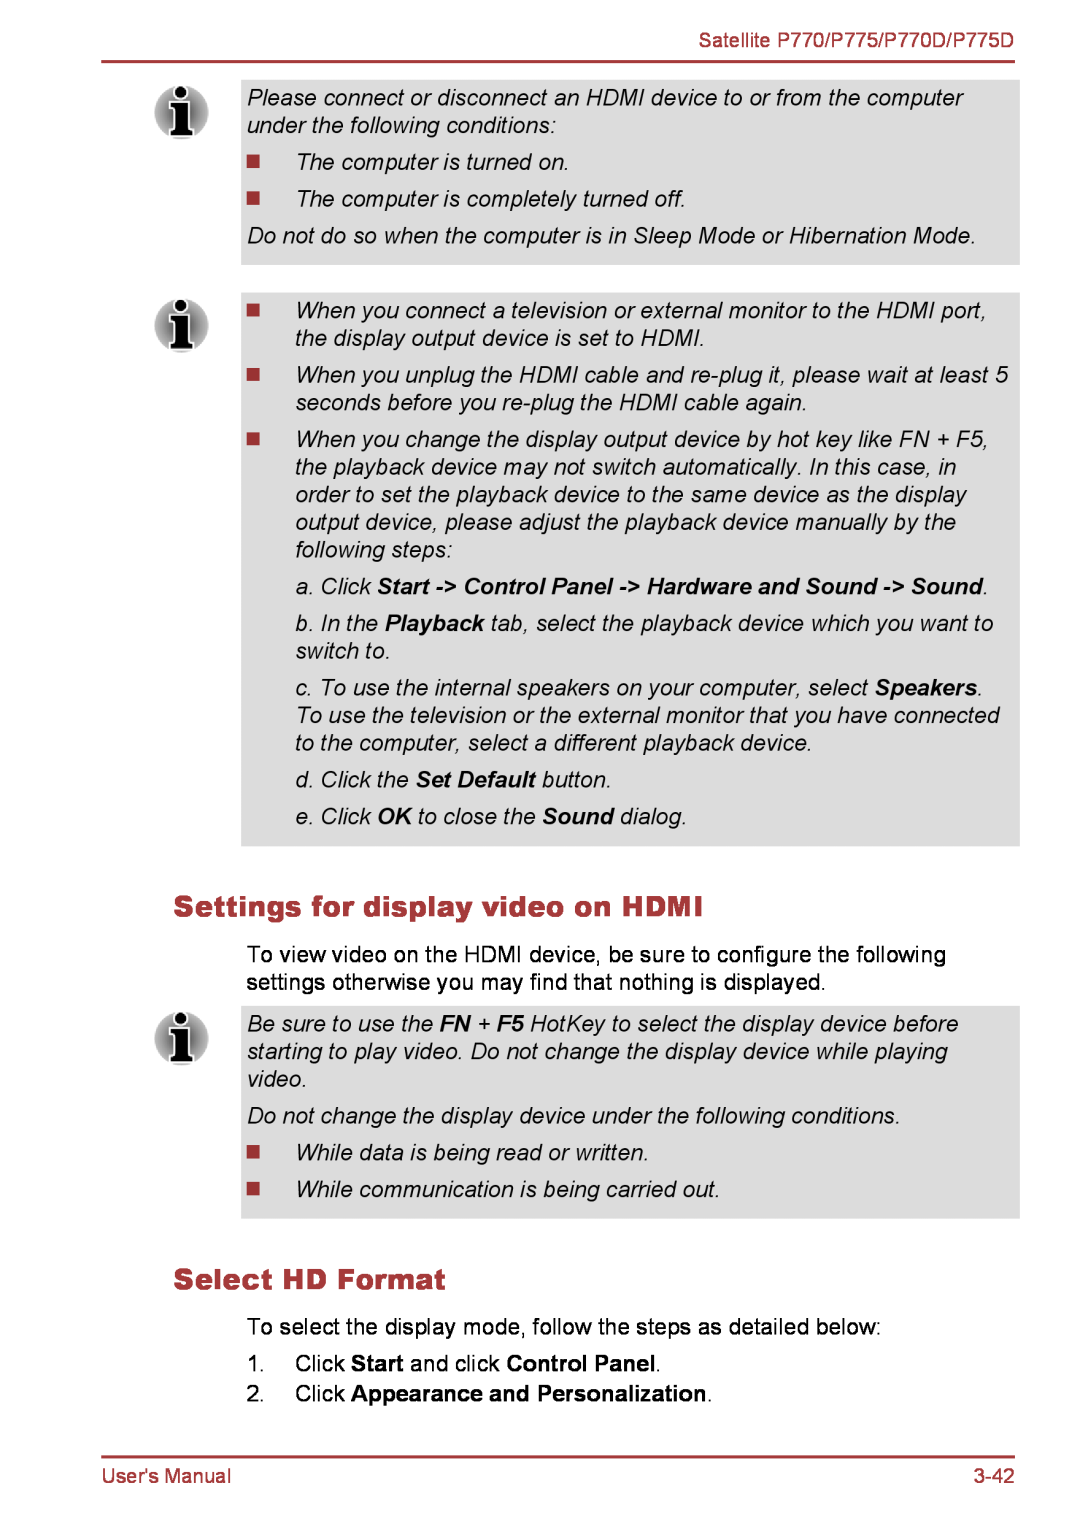 Toshiba P770 user manual Settings for display video on HDMI, Select HD Format, Click Start and click Control Panel 